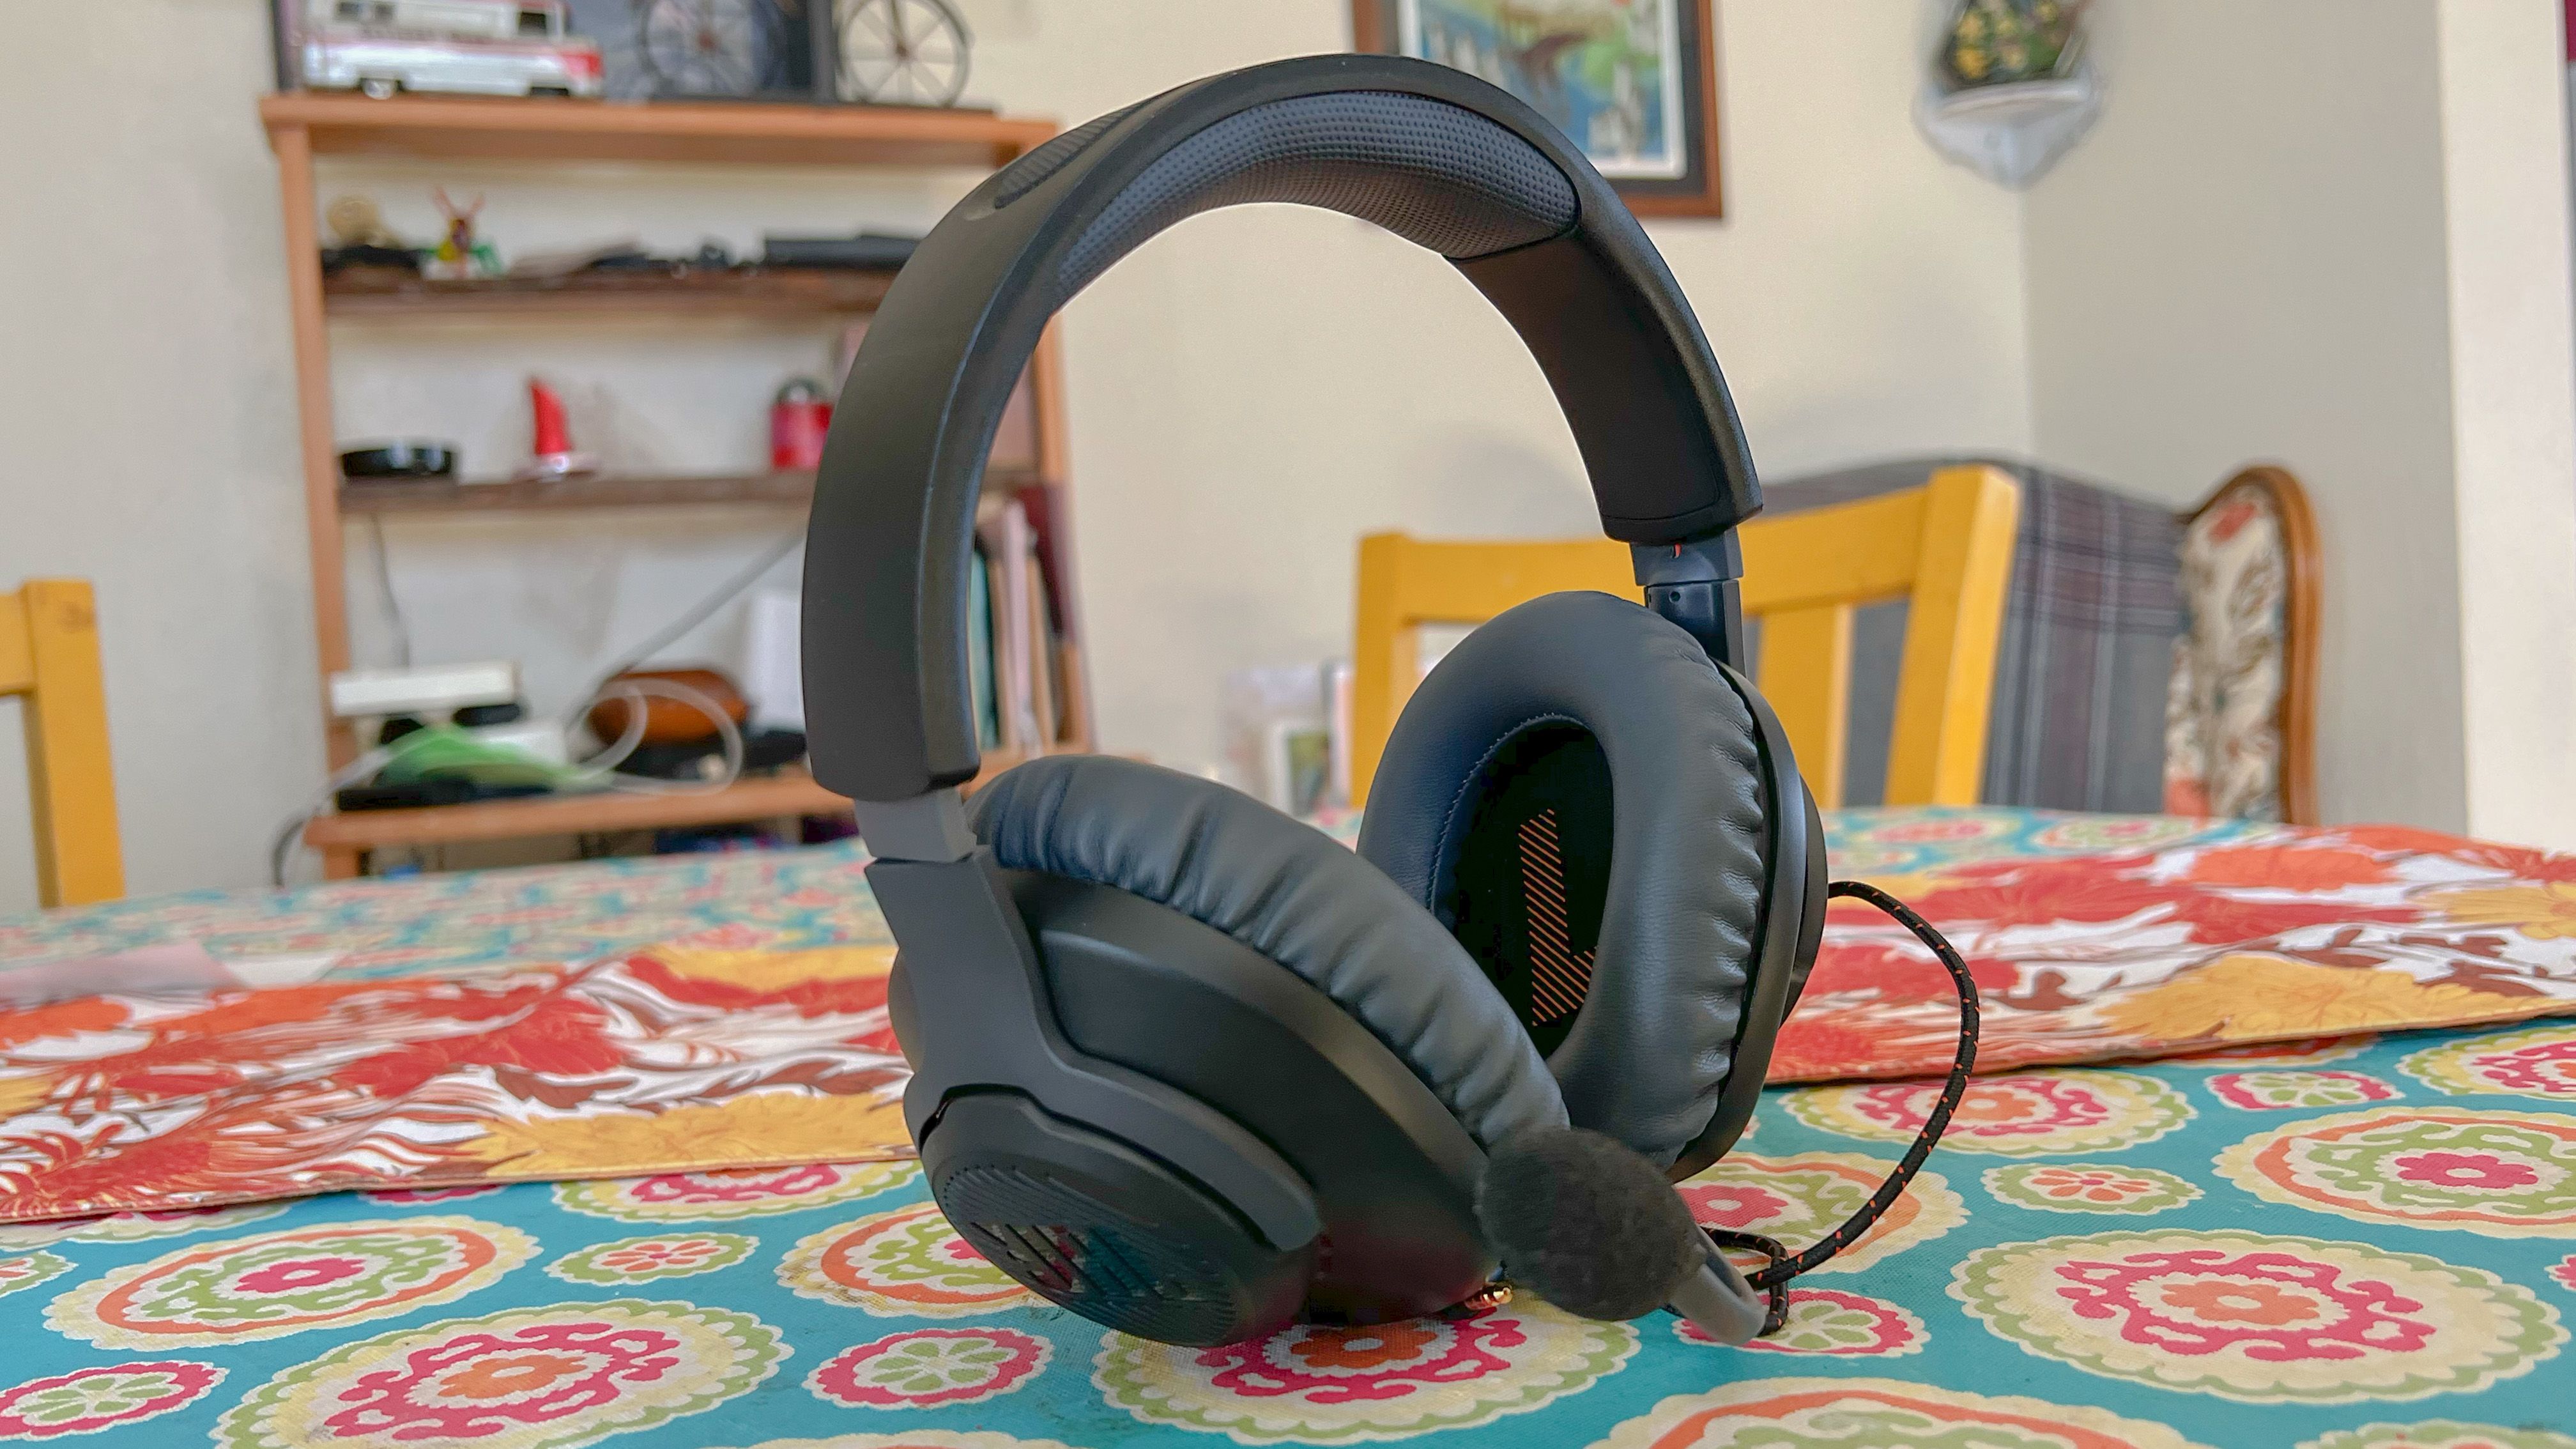 The Best Wired Gaming Headsets - 2022 Edition - YES, it's here! 